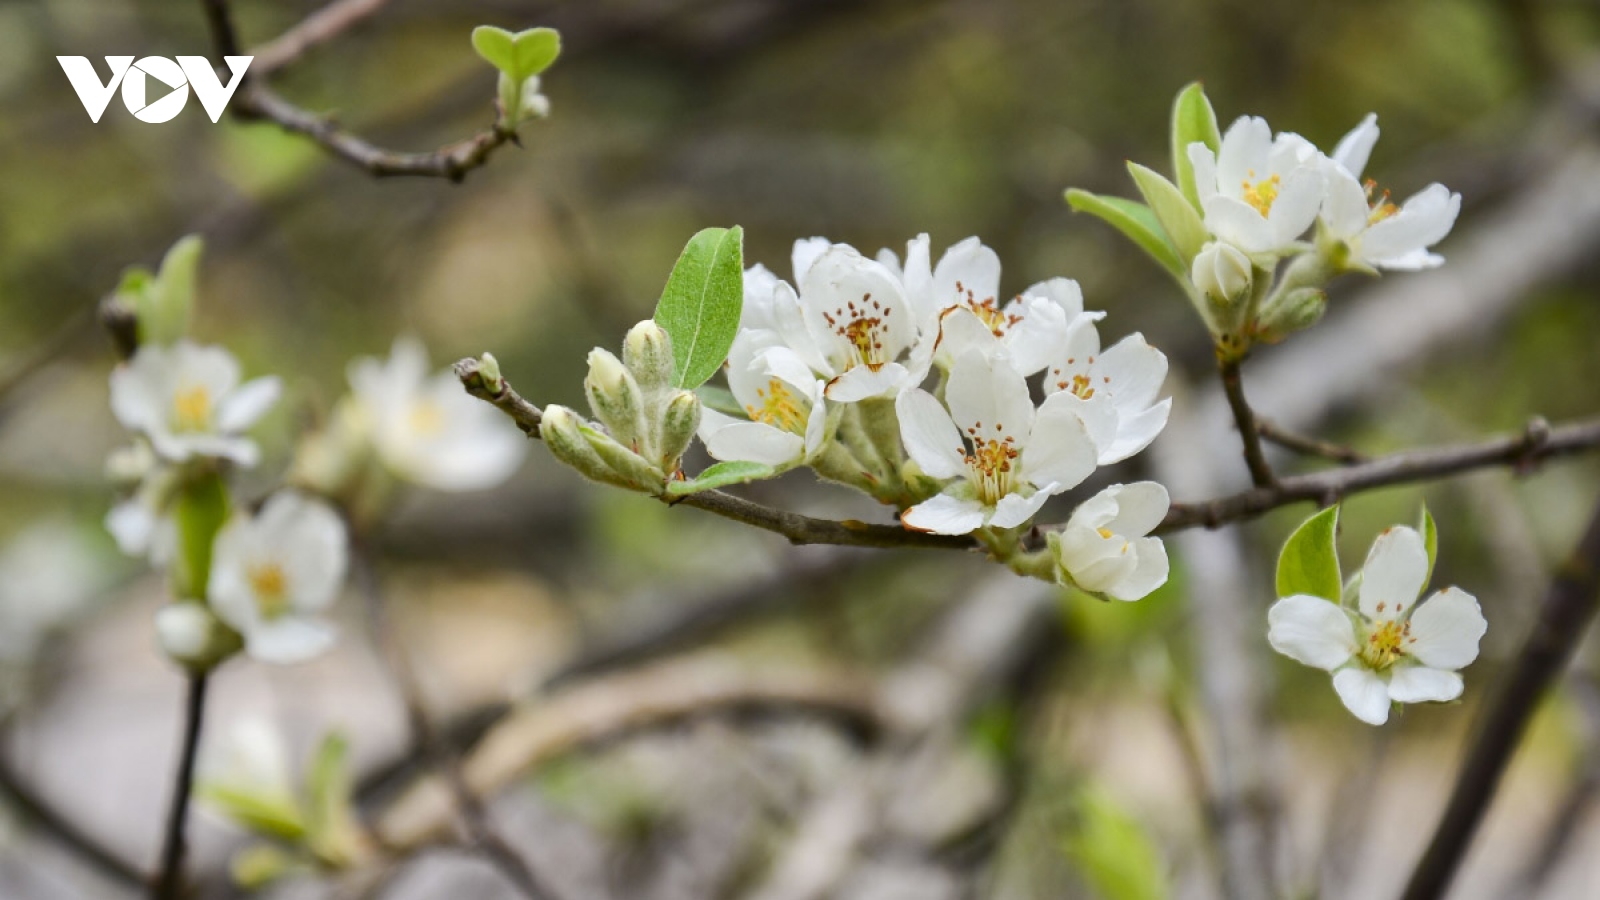 White Son Tra flowers spotted in full bloom on Pha Din peak